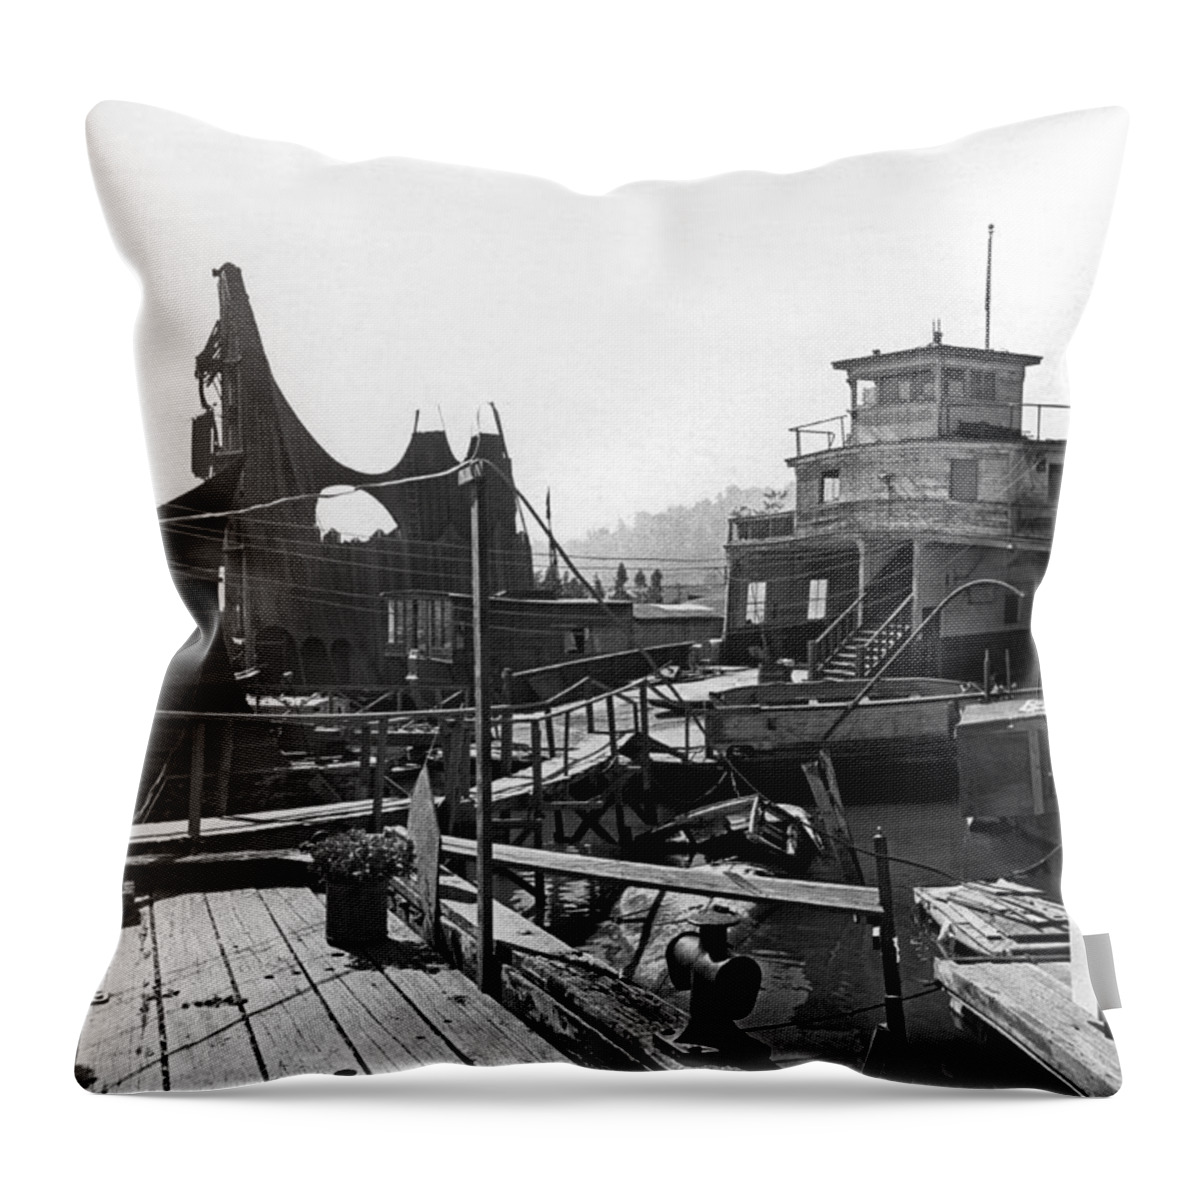 1969 Throw Pillow featuring the photograph Houseboats In Sausalito by Underwood Archives